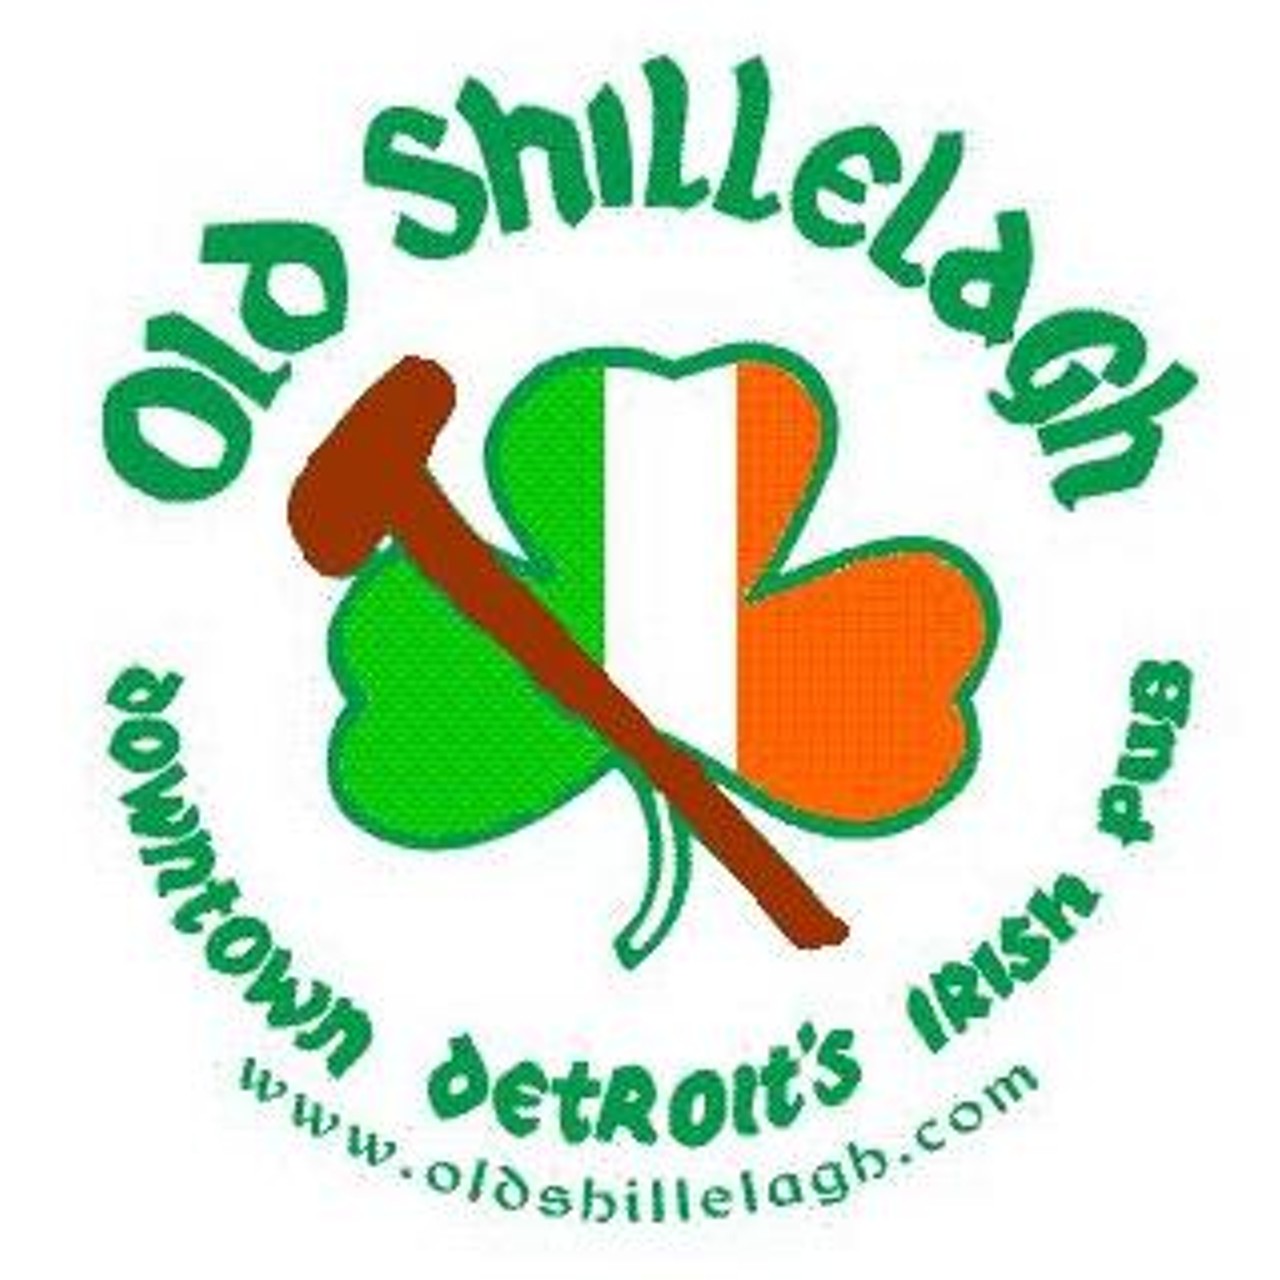 Old Shillelagh
Find live entertainment both inside and out at this hulking Irish monolith located in the heart of Greektown. The party includes two large heated tents and shuttles to and from the game.
Open at 7 a.m.; 349 Monroe St., Detroit; oldshillelagh.com; 313-964-0007; cover at the door.
Photo via Facebook.